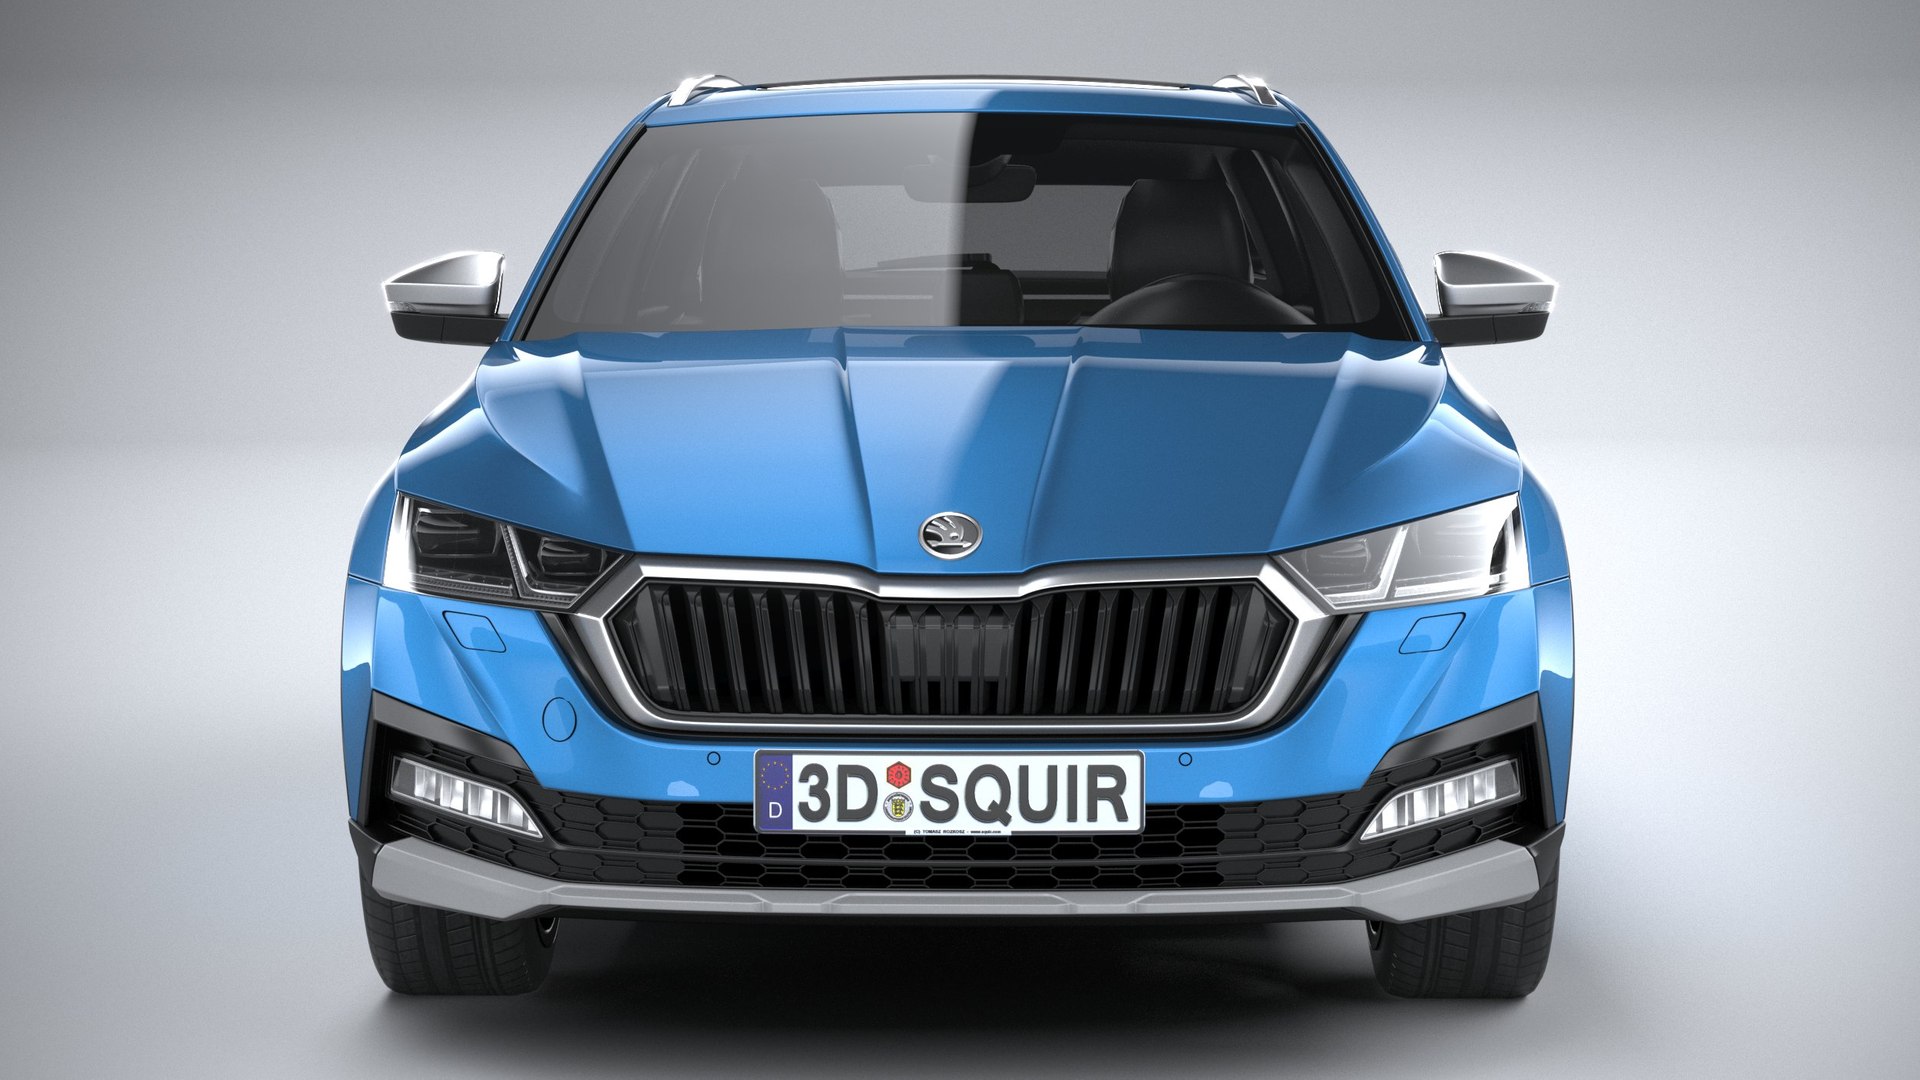 2021 Skoda Octavia Scout Rendering Previews The All-Rounder